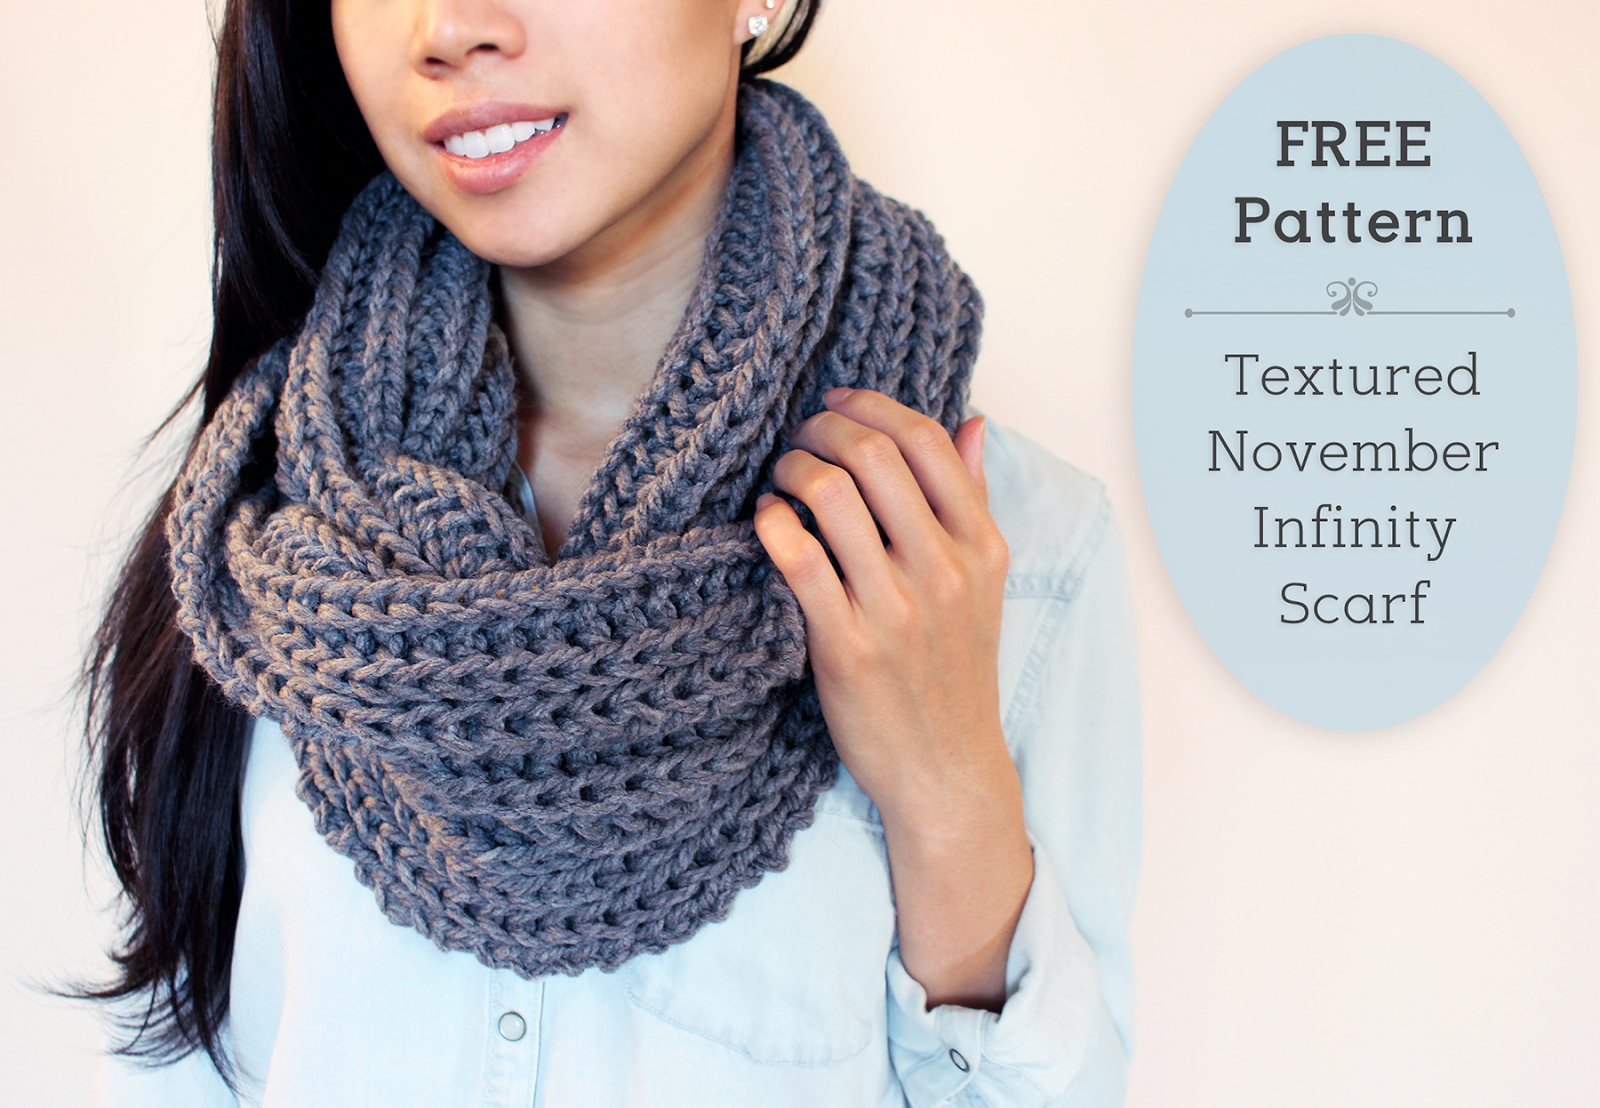 Cowl Scarf Knit Pattern Purllin Textured November Infinity Scarf Free Pattern